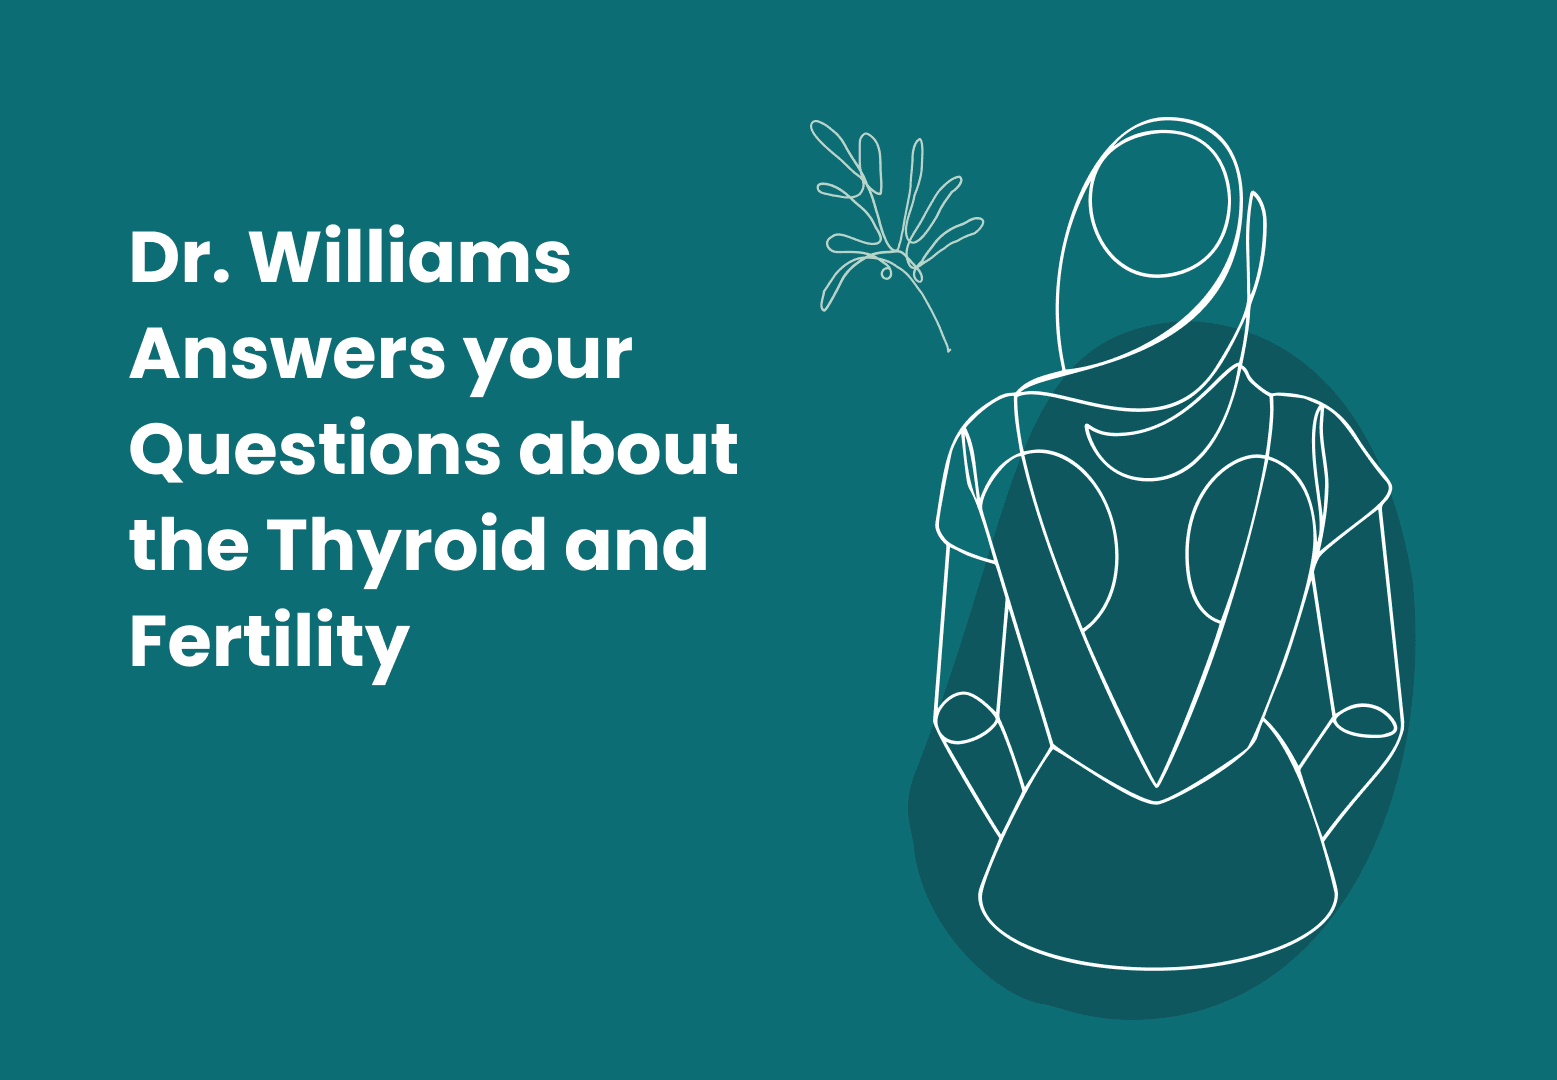 Dr. Williams Answers your Questions about the Thyroid and Fertility